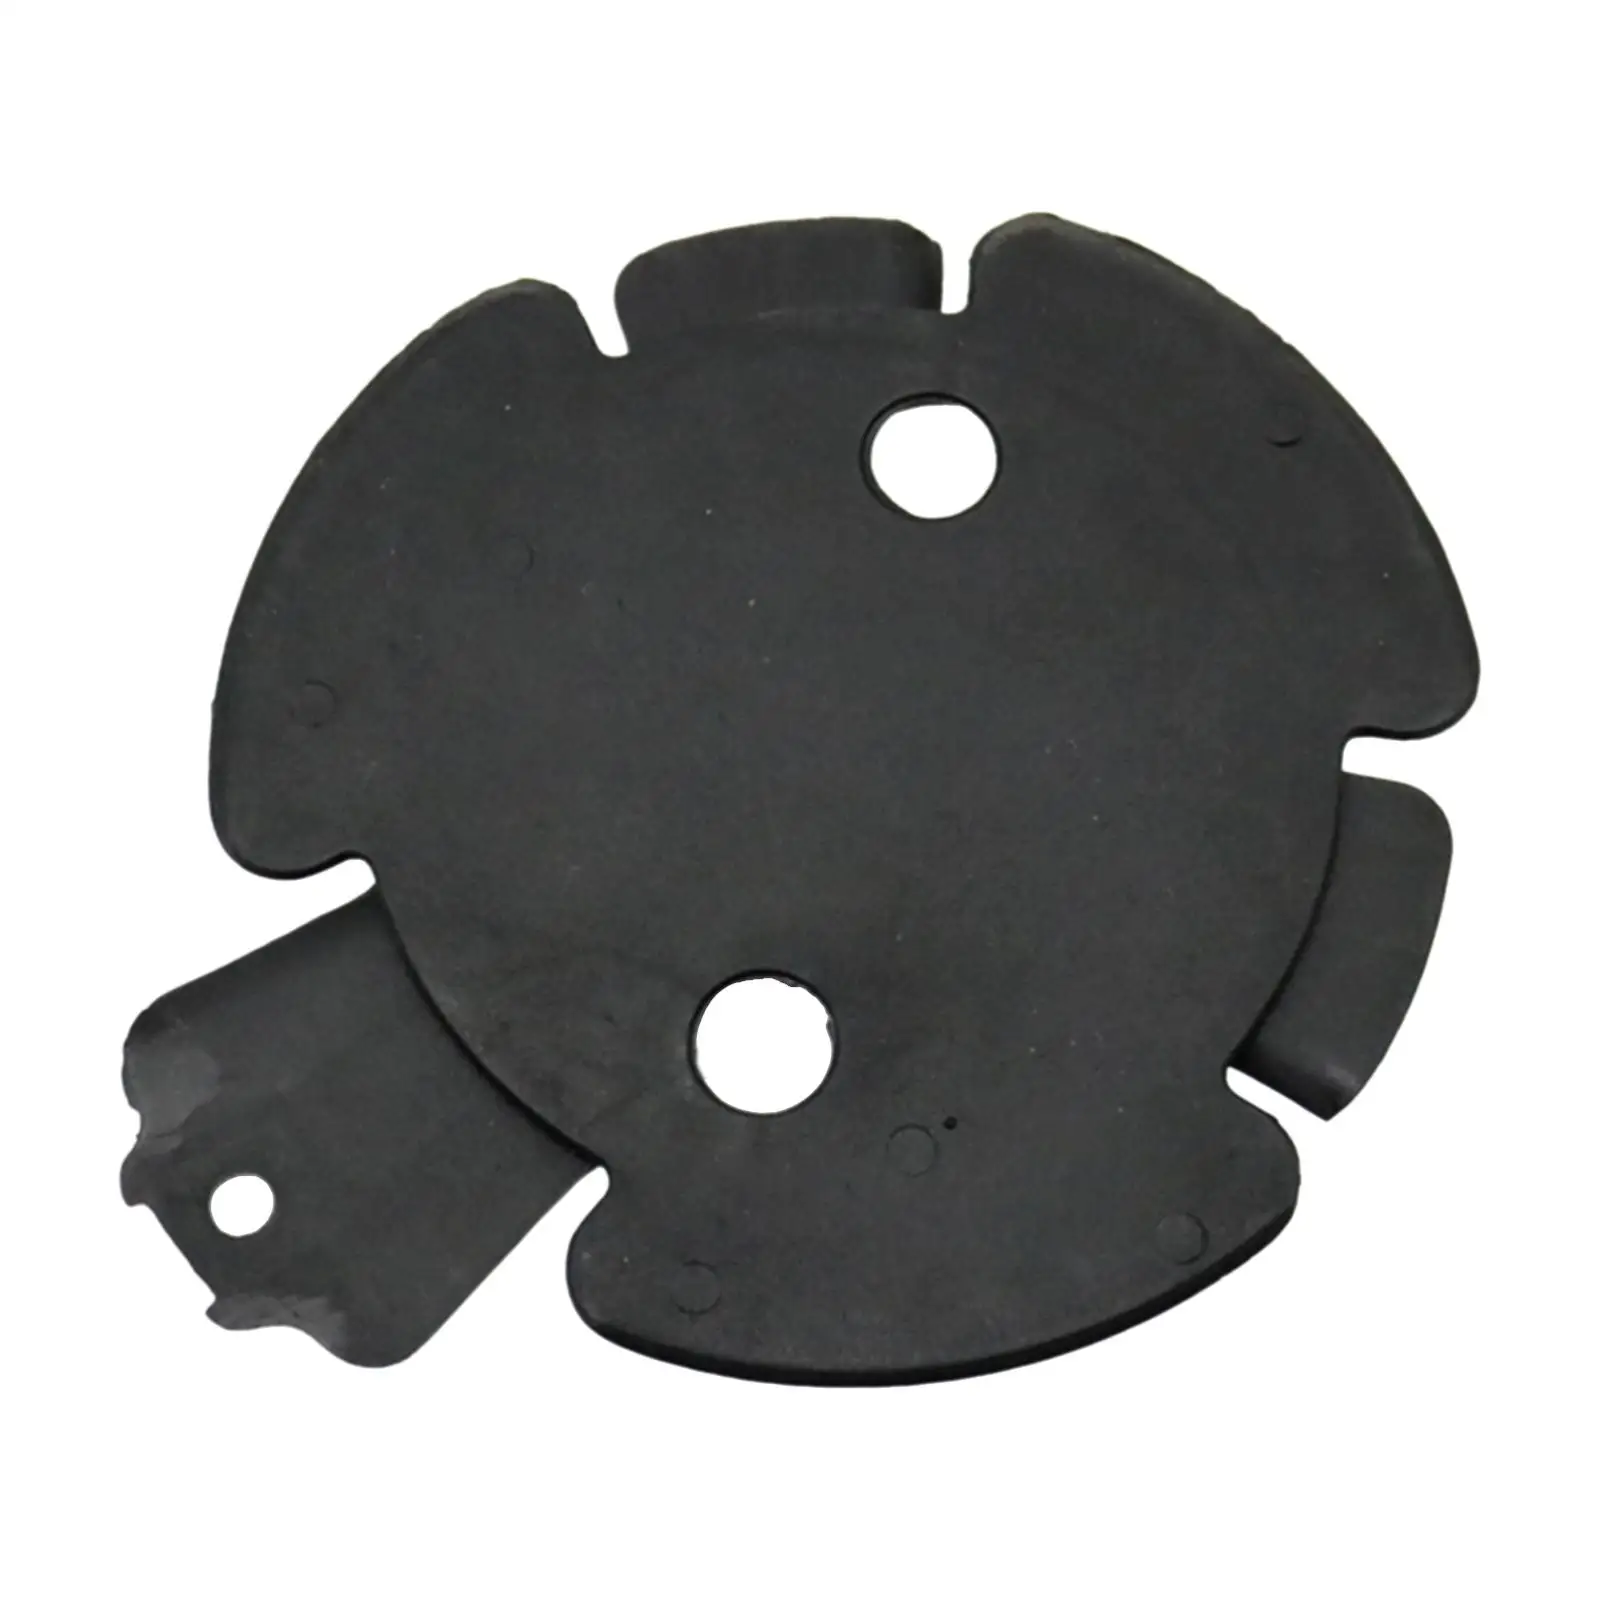 Auto Oil Sump Underfloor Drain Cover Flap, 7209541 Replace Professional Easy to Install